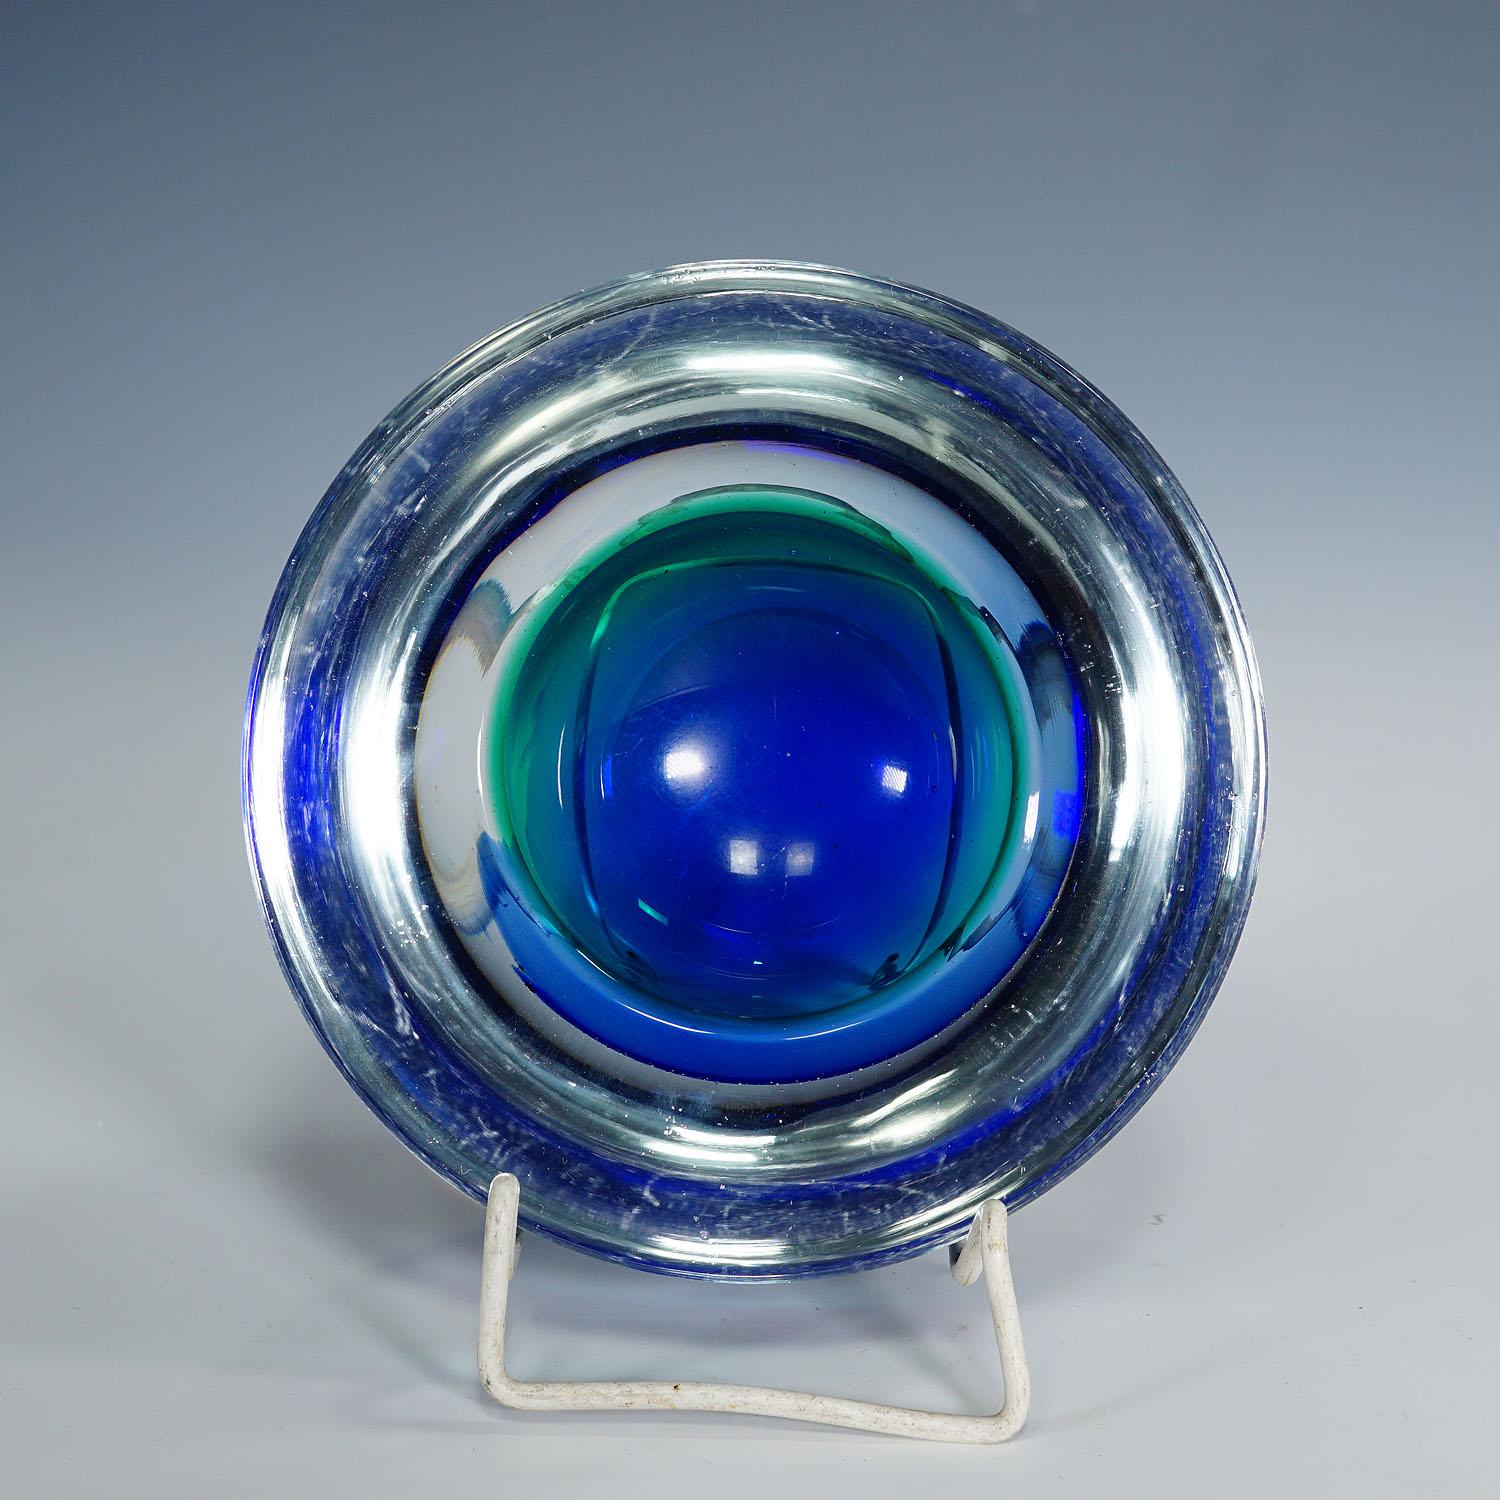 Italian Archimede Seguso Geode Bowl in Blue and Green, Murano Italy ca. 1960s For Sale